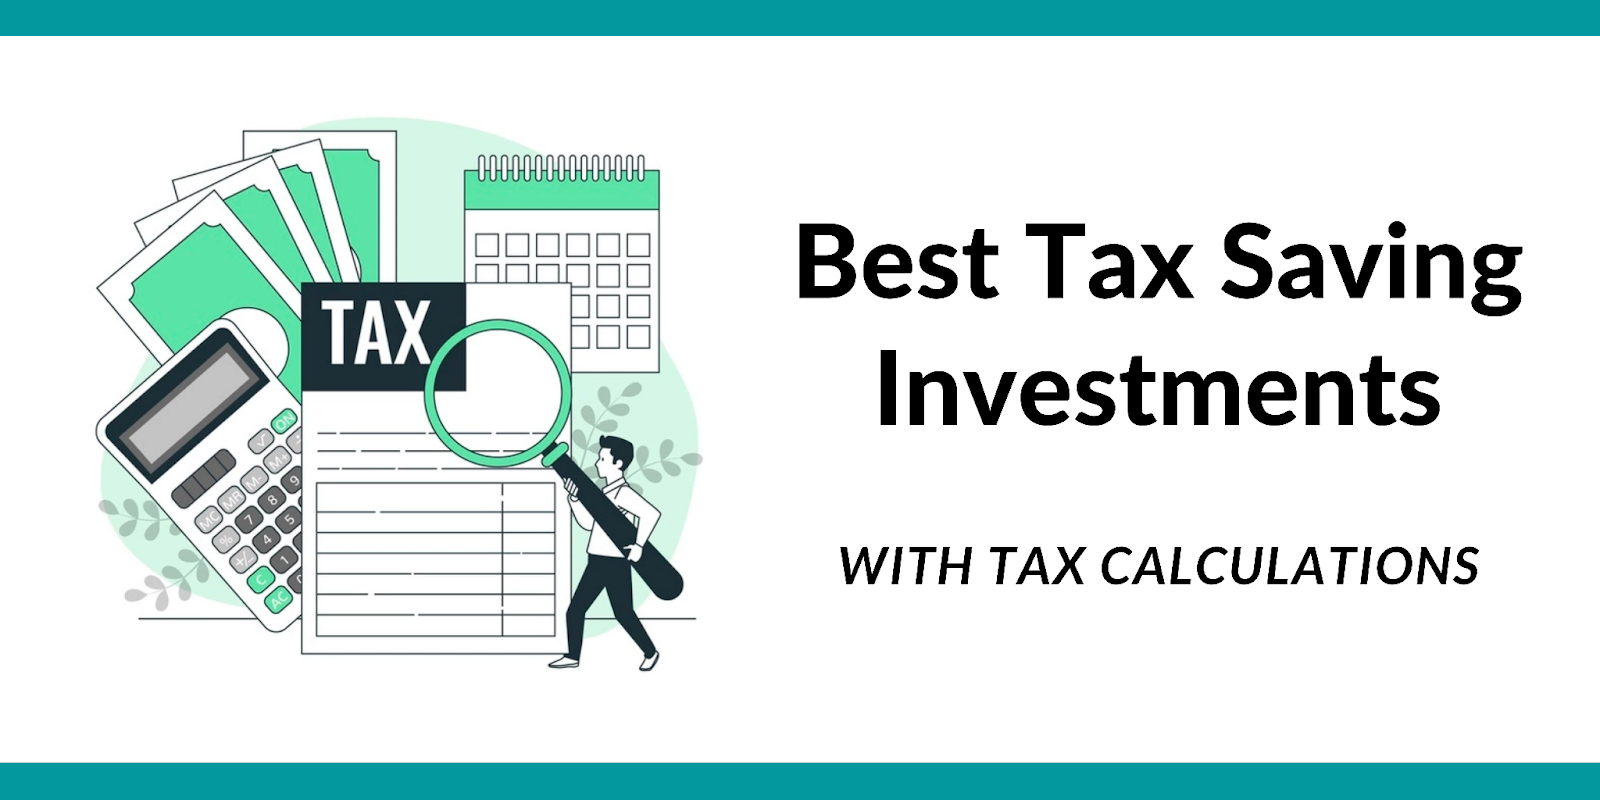 Best Tax Saving Investments